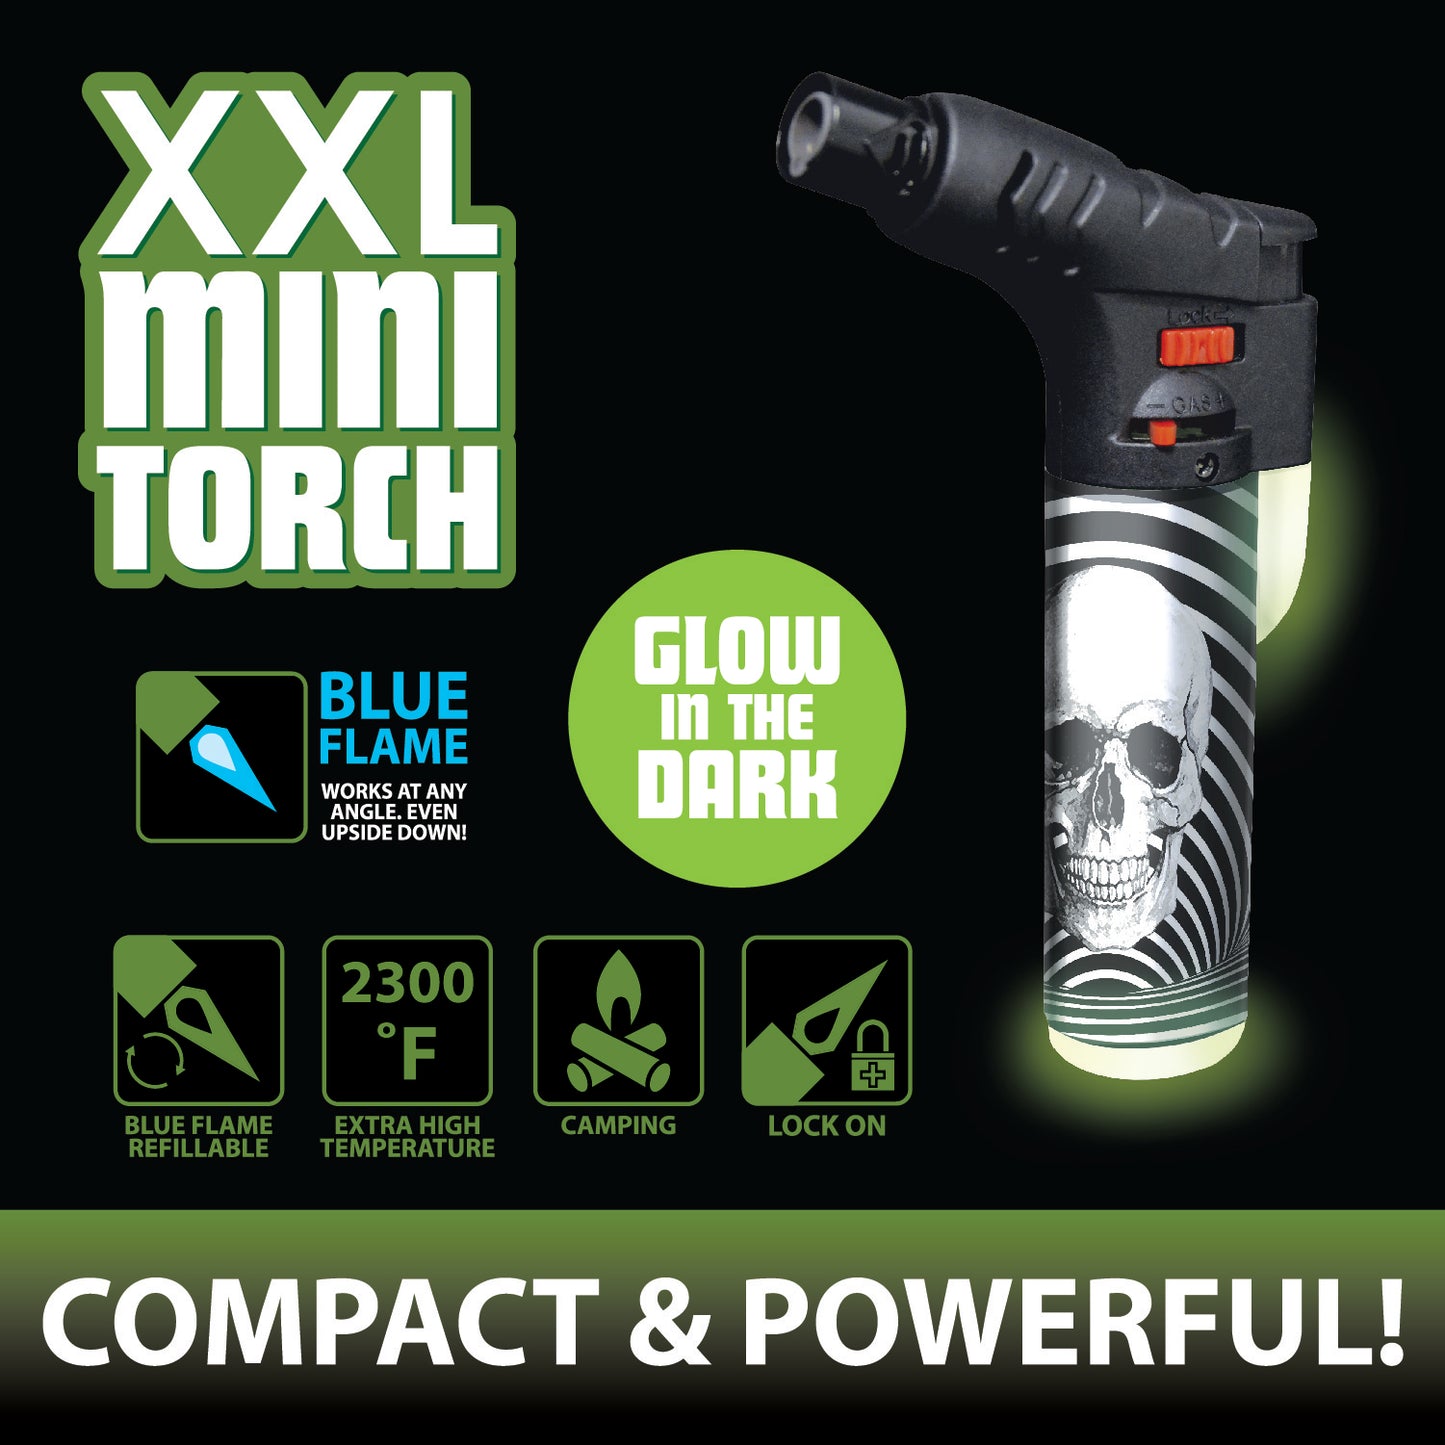 ITEM NUMBER 022611 THIN PRINTED XXL GID TORCH 18 PIECES PER DISPLAY